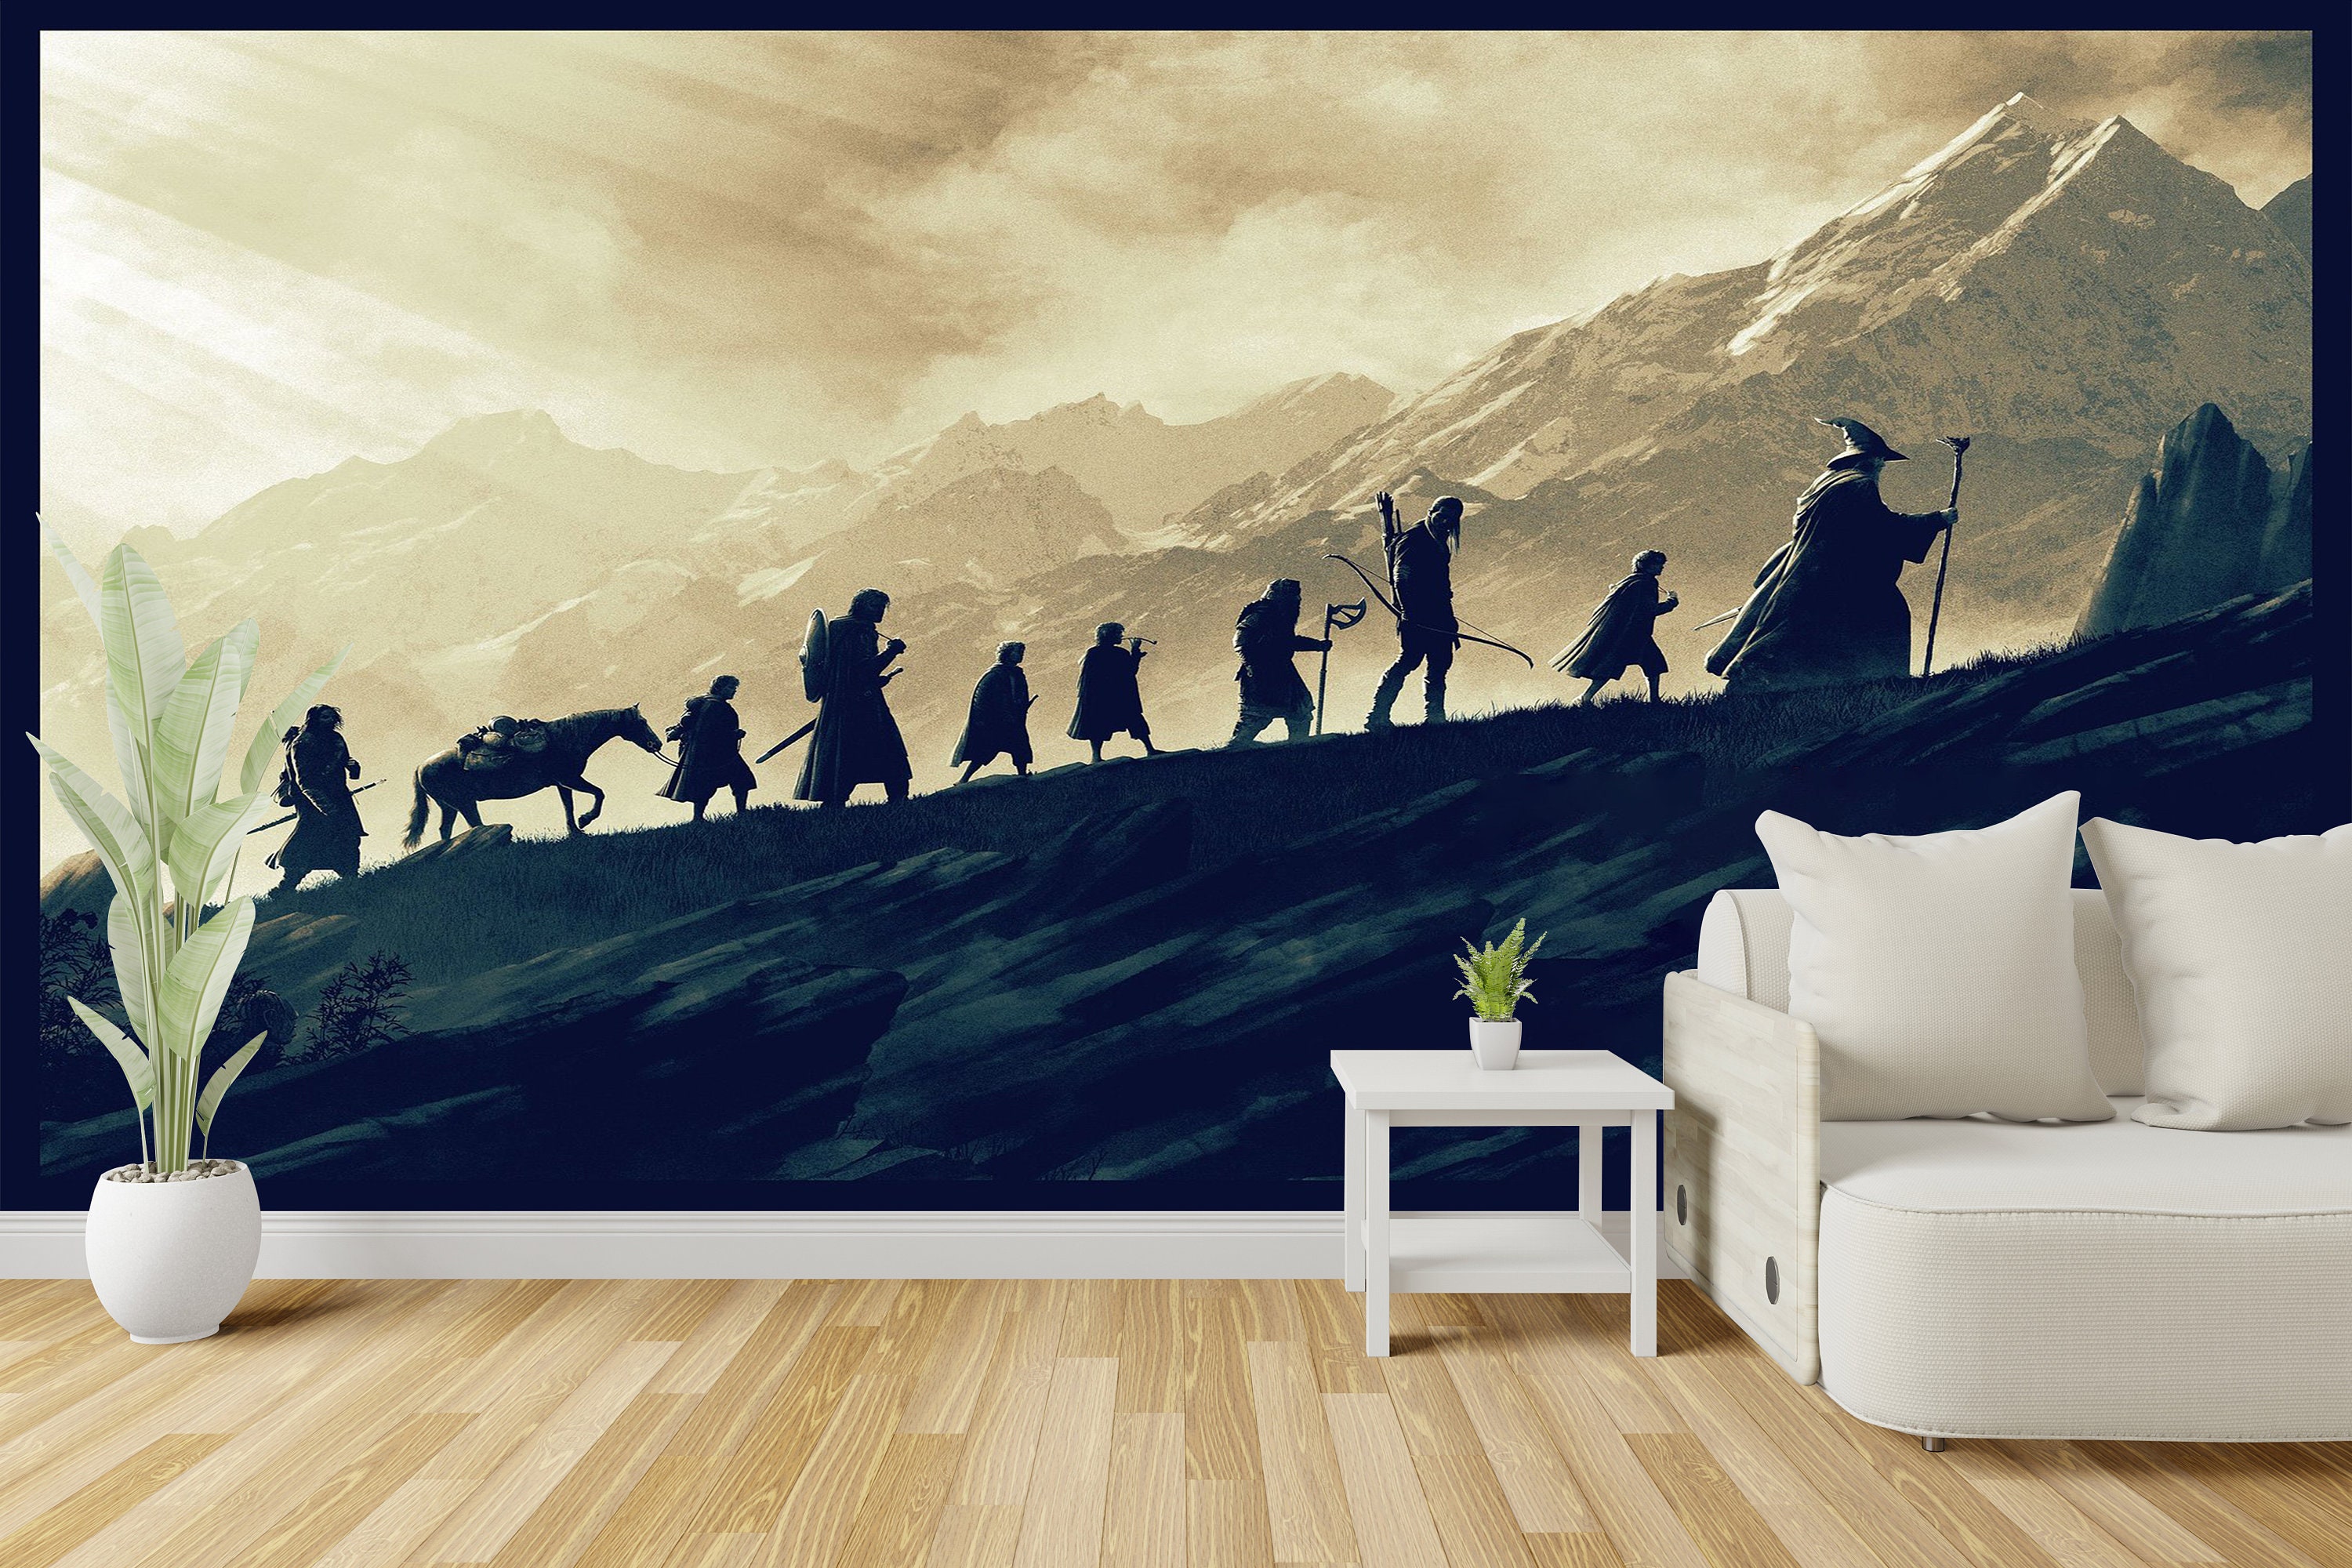 Check out kookypj's Shuffles The Lord of the Rings #lotr #tlotr  #thelordoftherings | Lord of the rings, The hobbit, Hobbit art